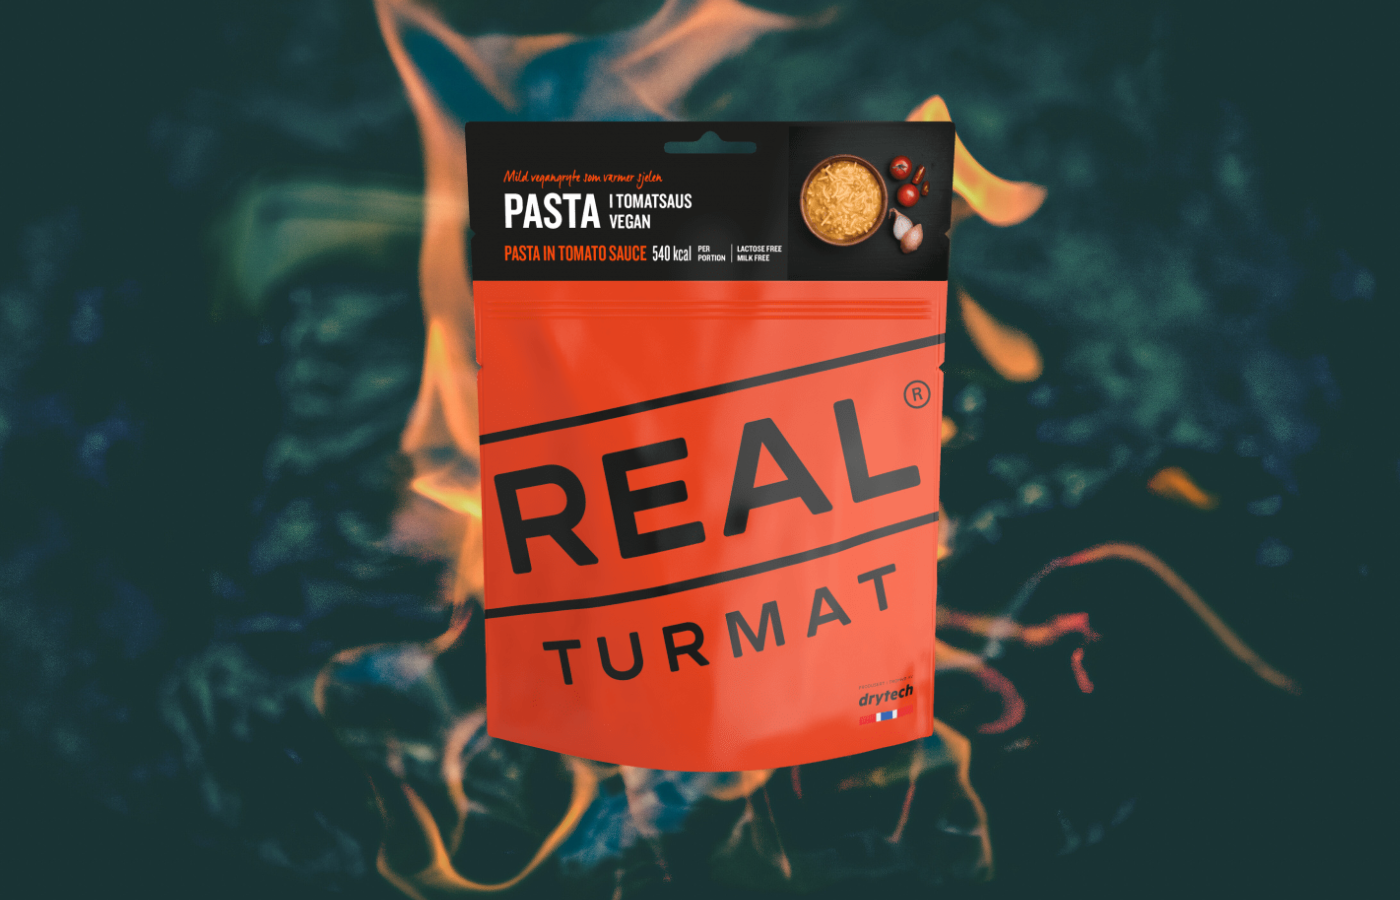 Real Turmat Pasta in Tomato Sauce - best vegetarian backpacking meals